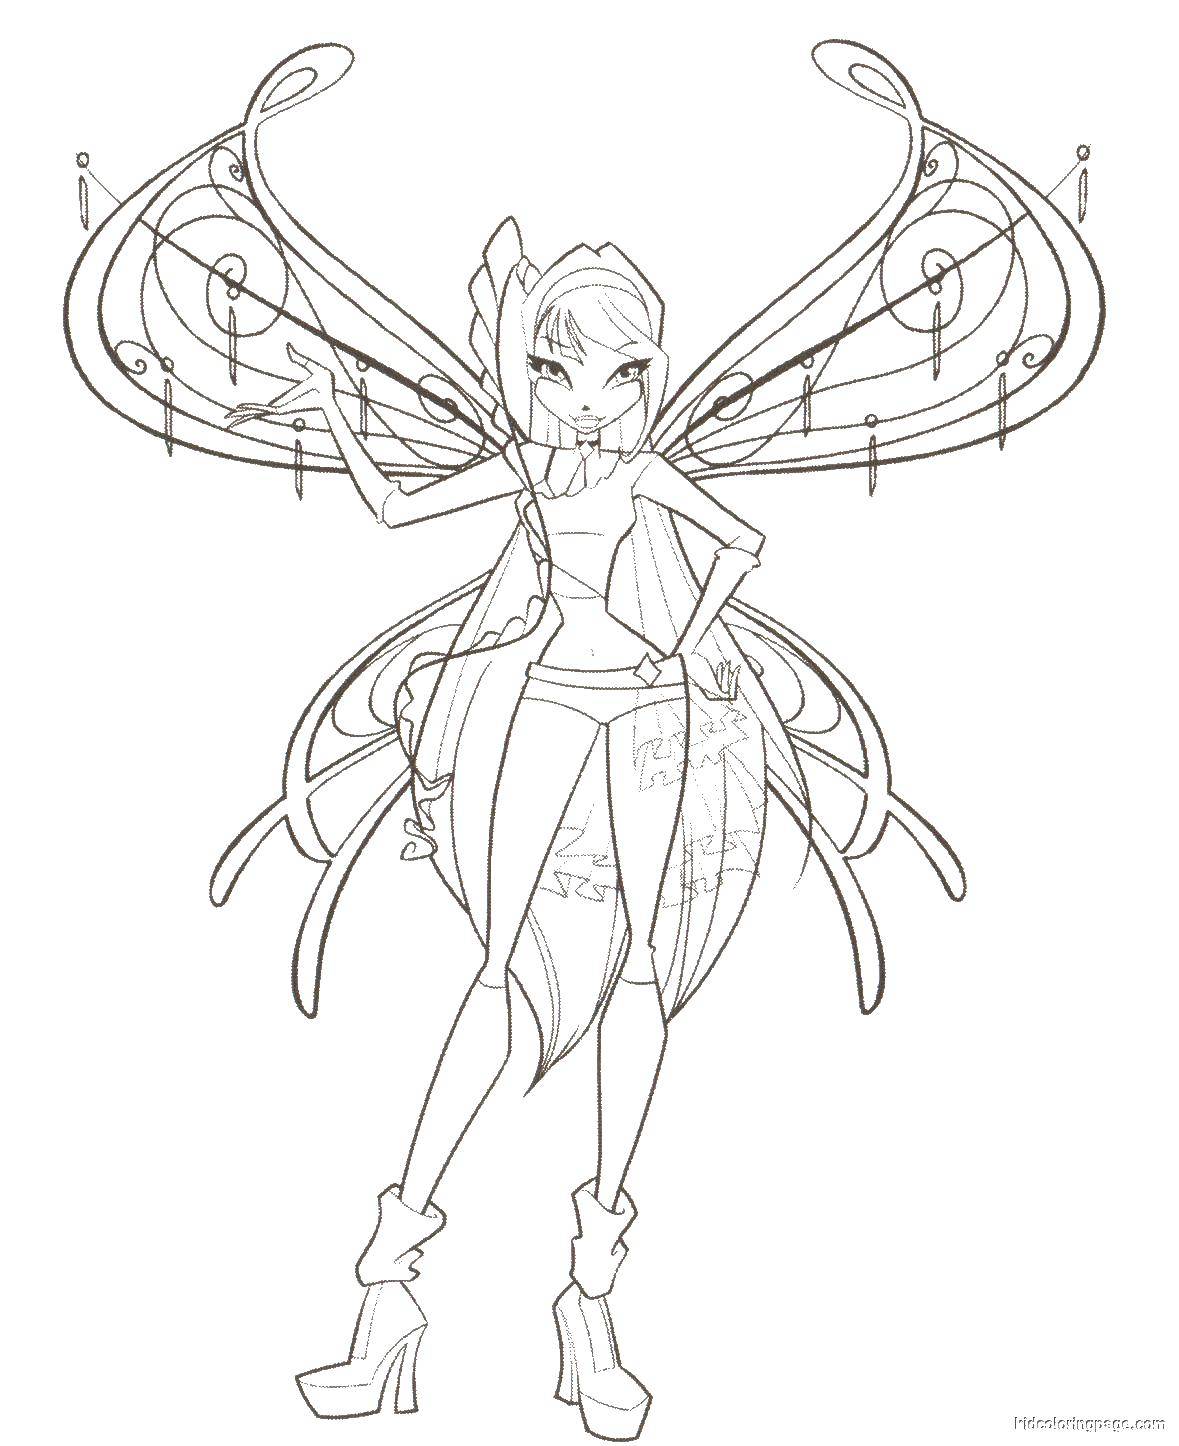 Coloring Bloom fairy. Category Winx club. Tags:  the fairy, bloom, wings.